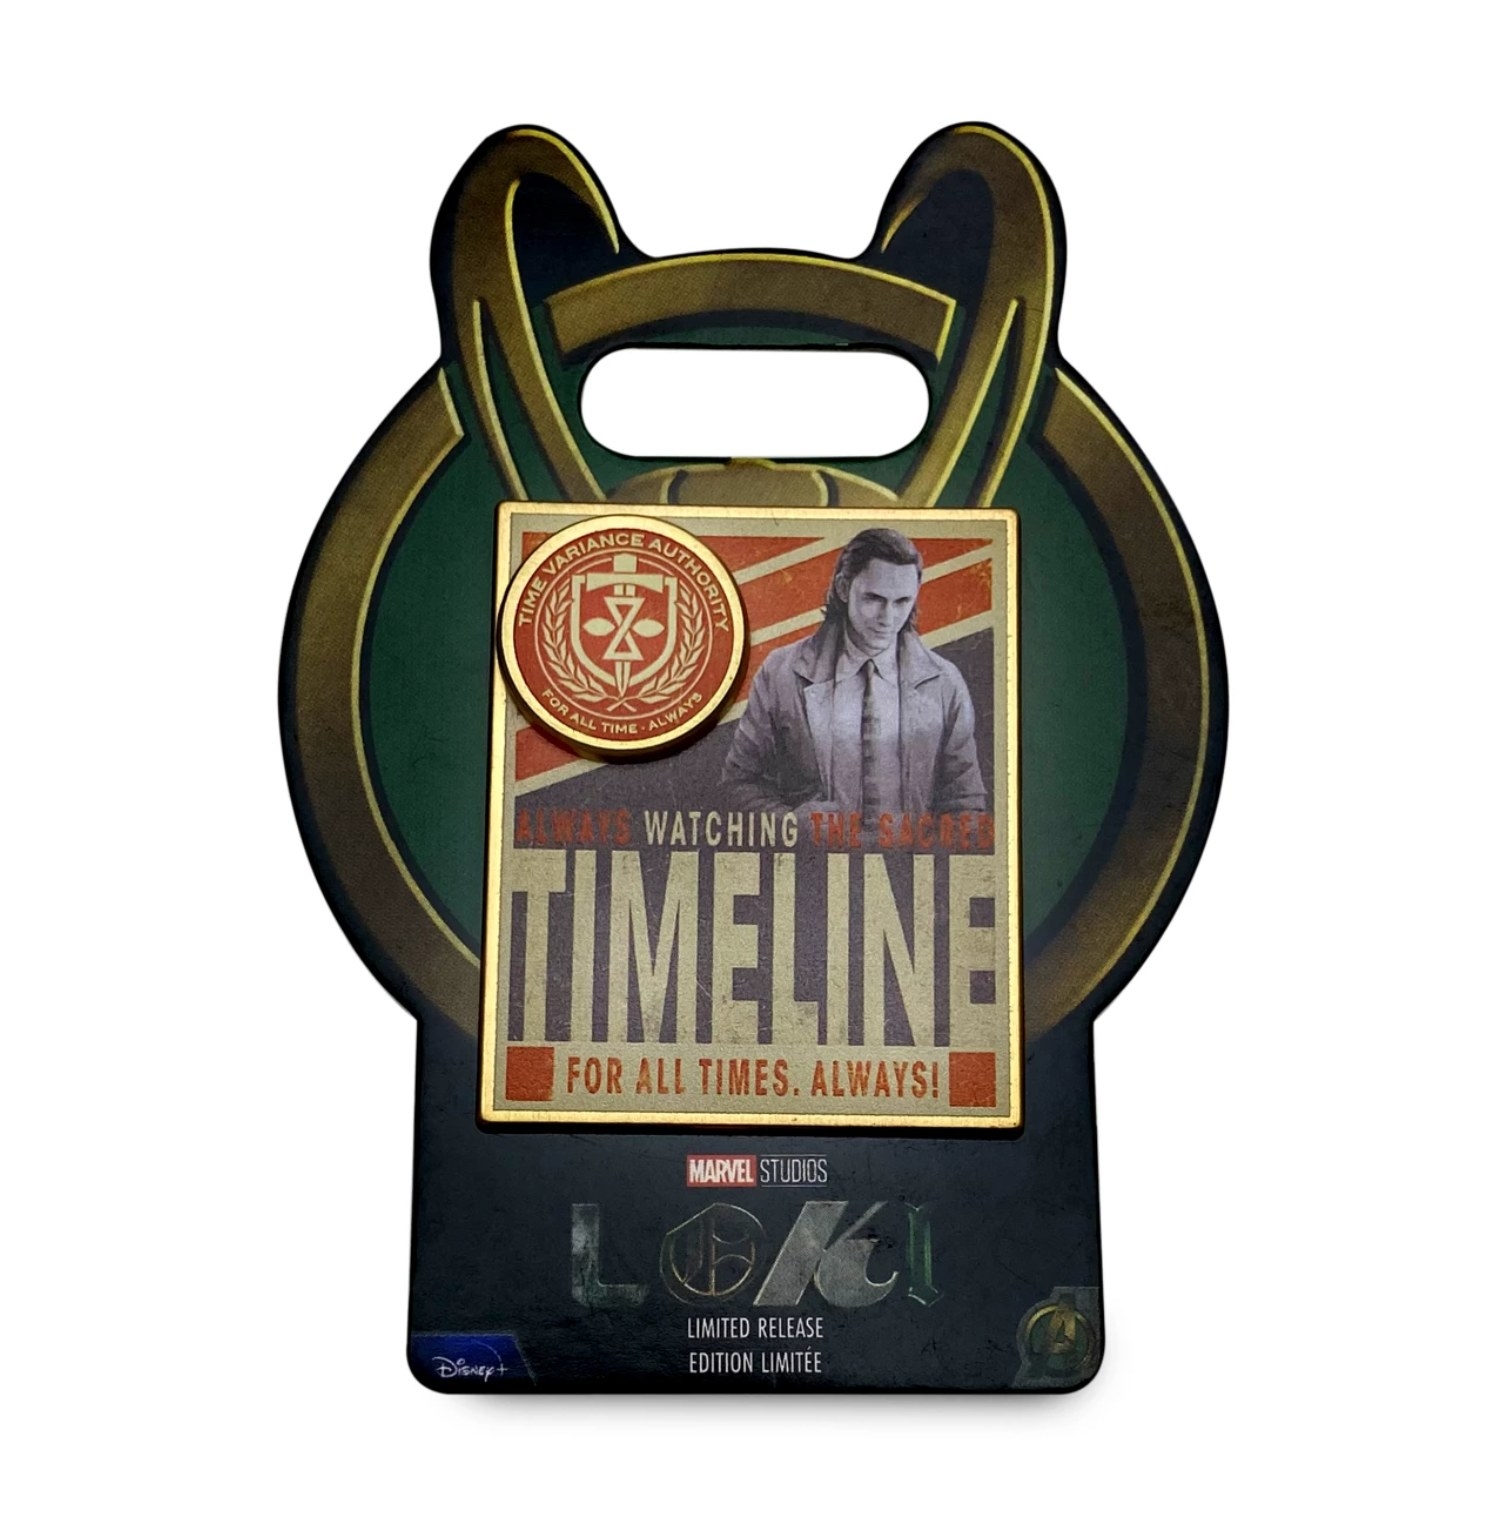 the green pin with loki and the timeline logo